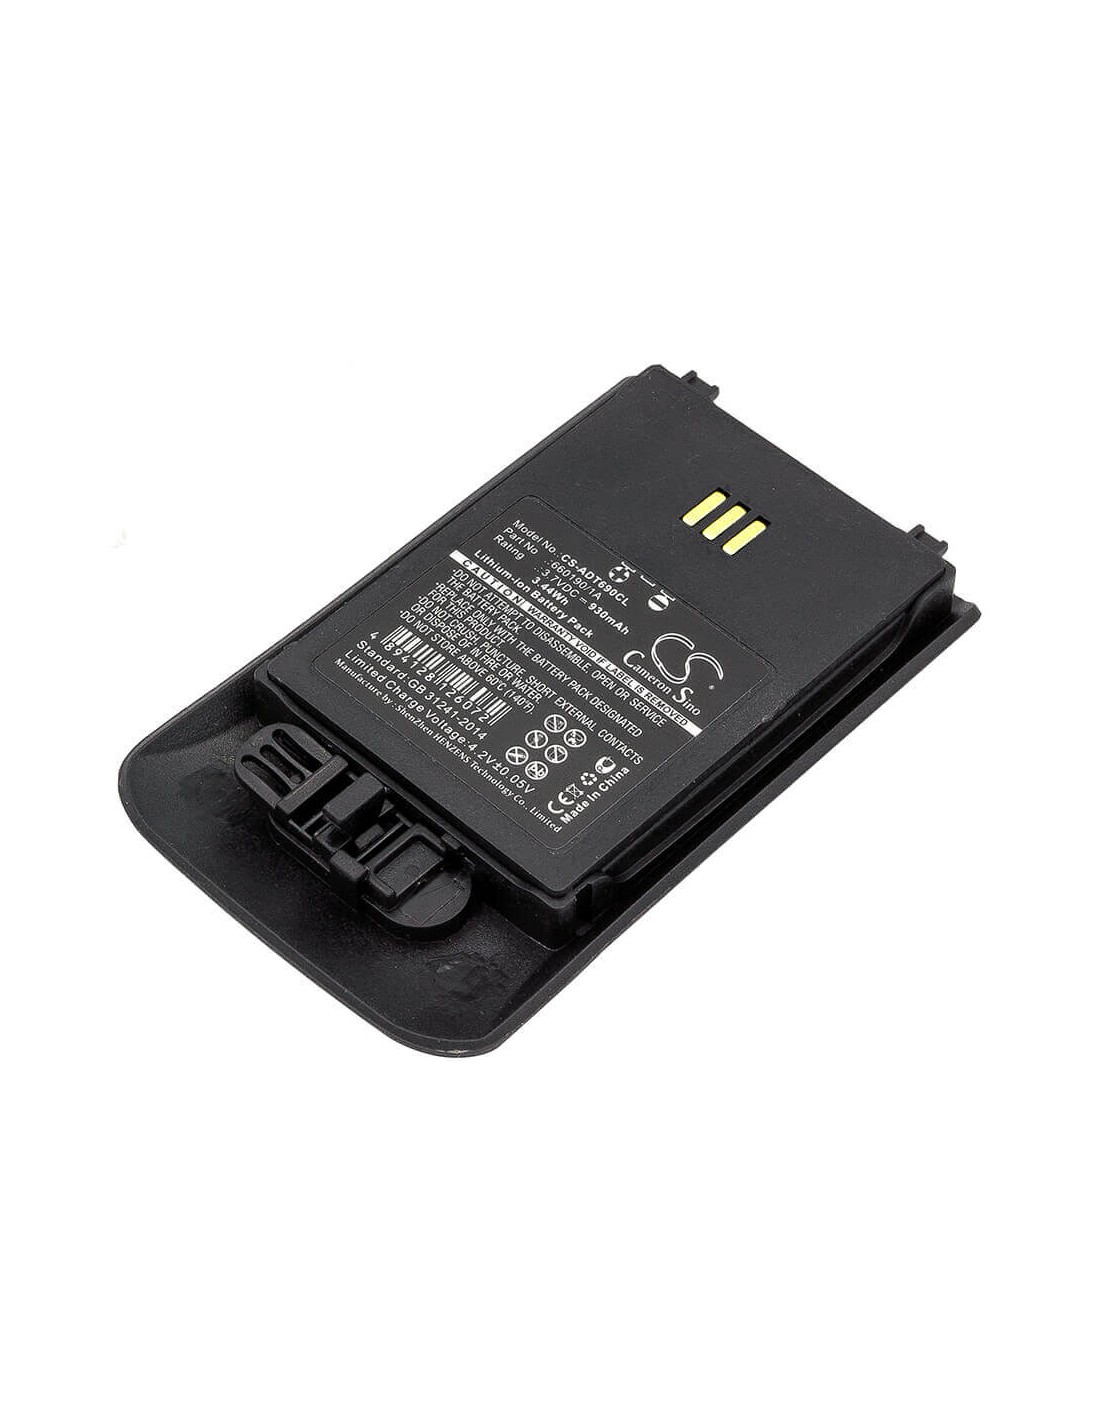 Battery for Aastra, Dh4-baaa/2b, Dt690, Dt692 3.7V, 930mAh - 3.44Wh